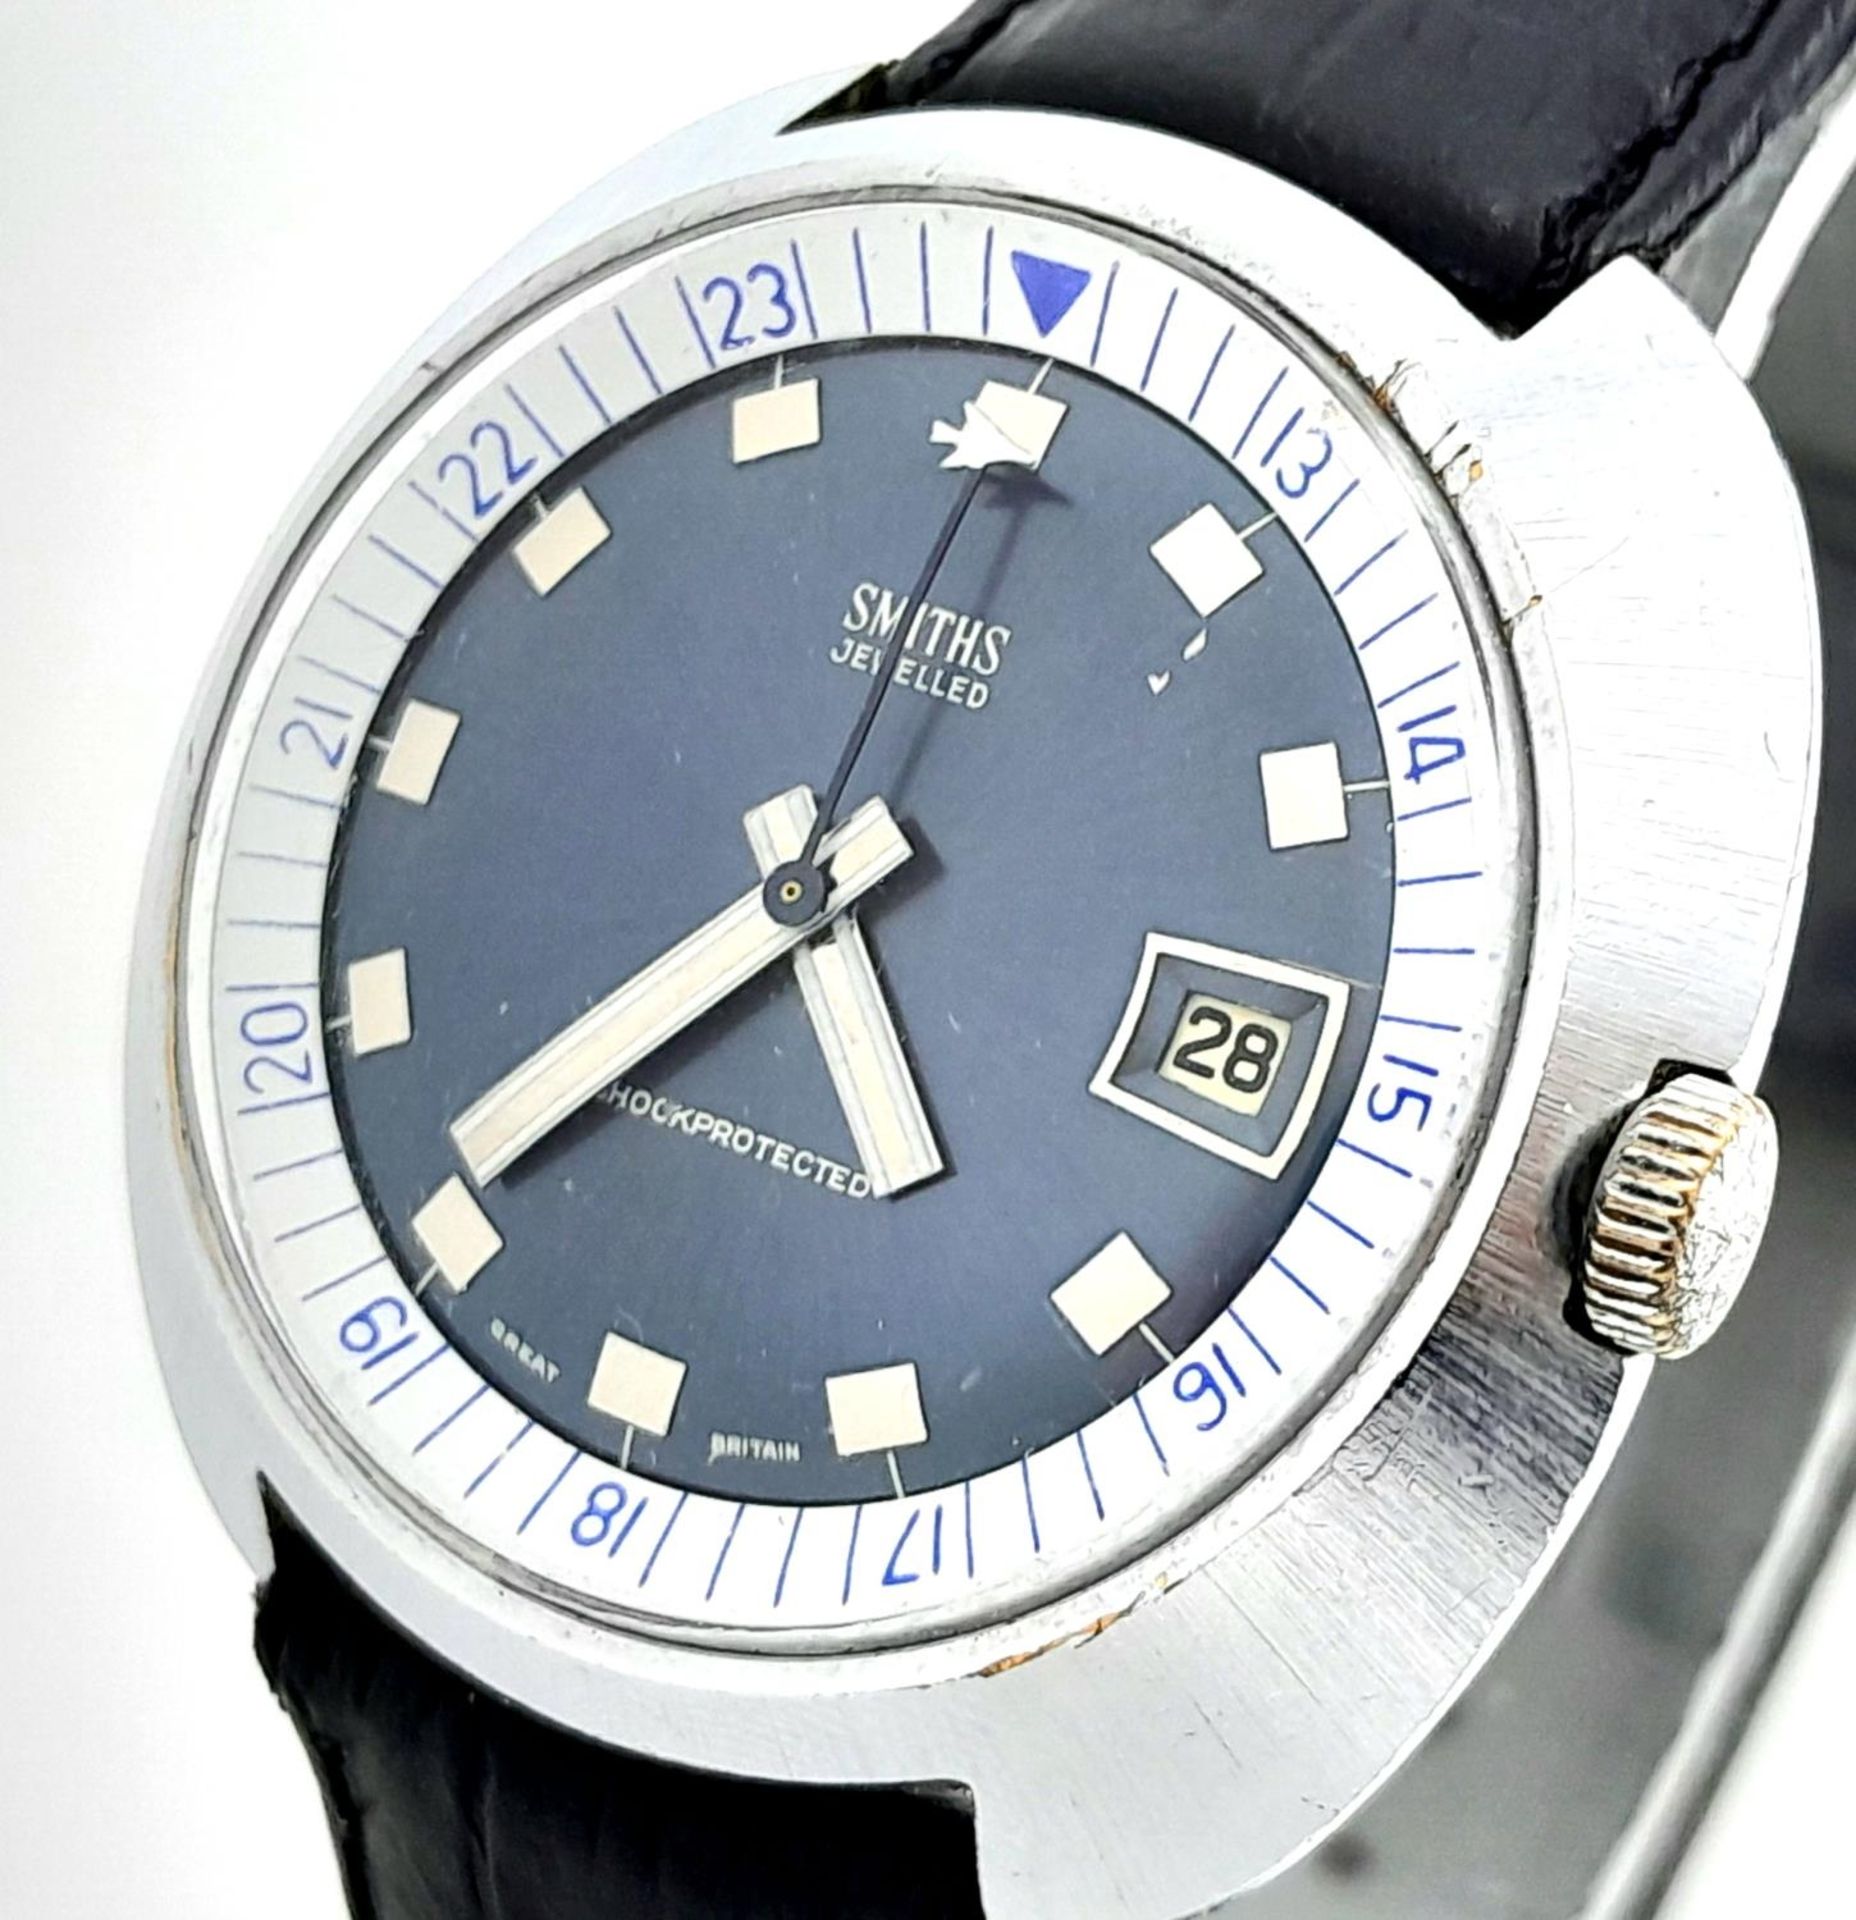 A Vintage Smiths Mechanical Gents Watch. Black leather strap. Stainless steel case - 42mm. Blue dial - Image 2 of 6